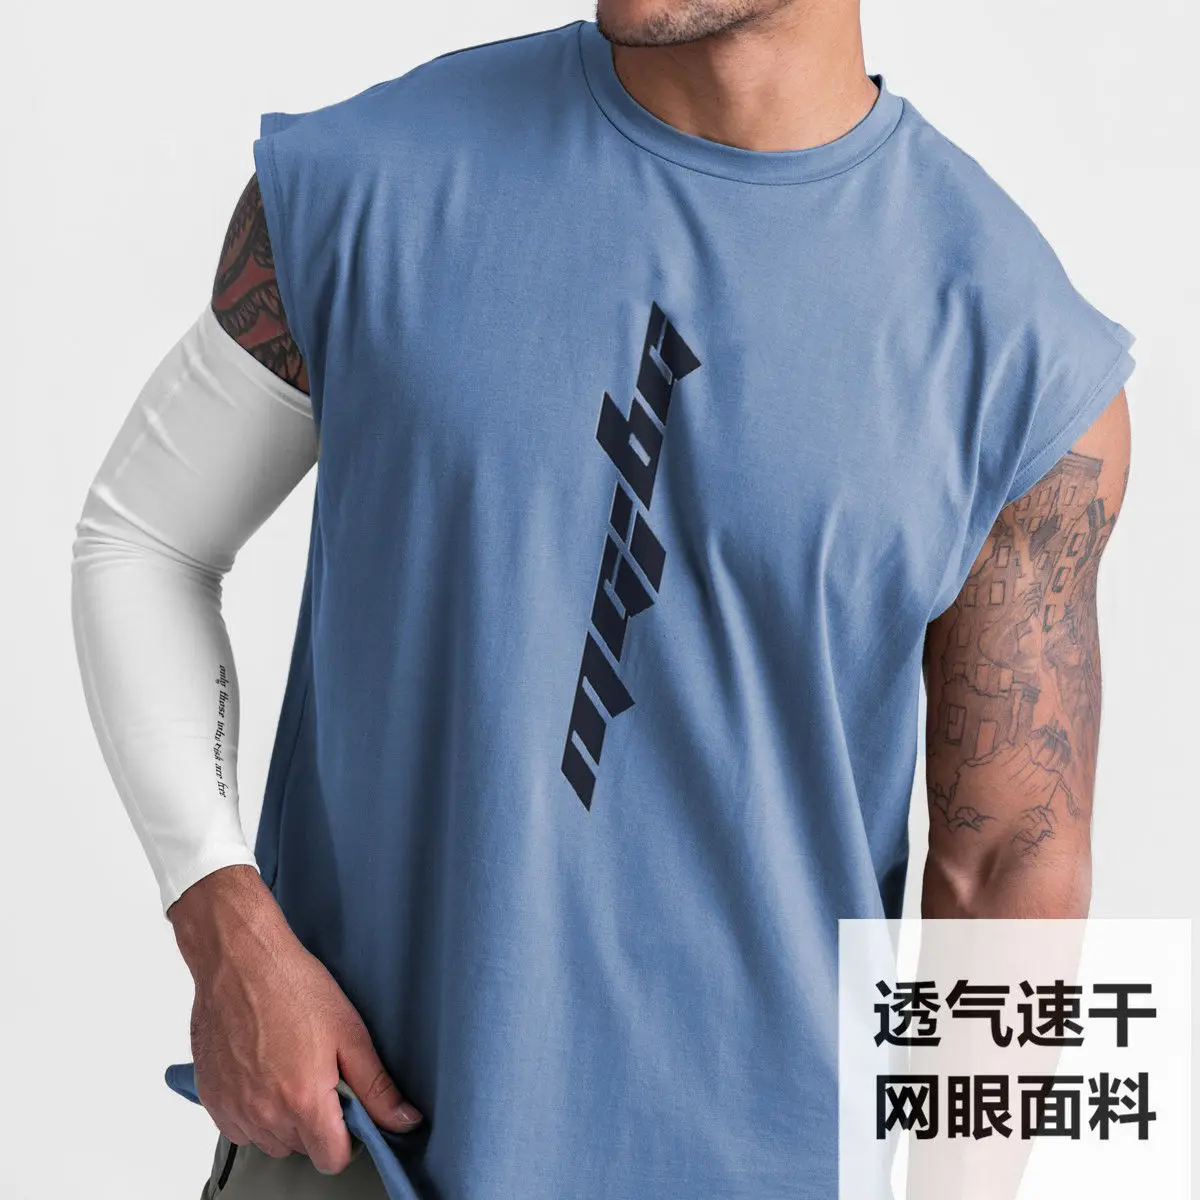 Men Sleeveless Shirt Mesh Material Quick Dry Breathable Tank Top Vest Men Gym Fitness Basketball Workout Beach Top Tee